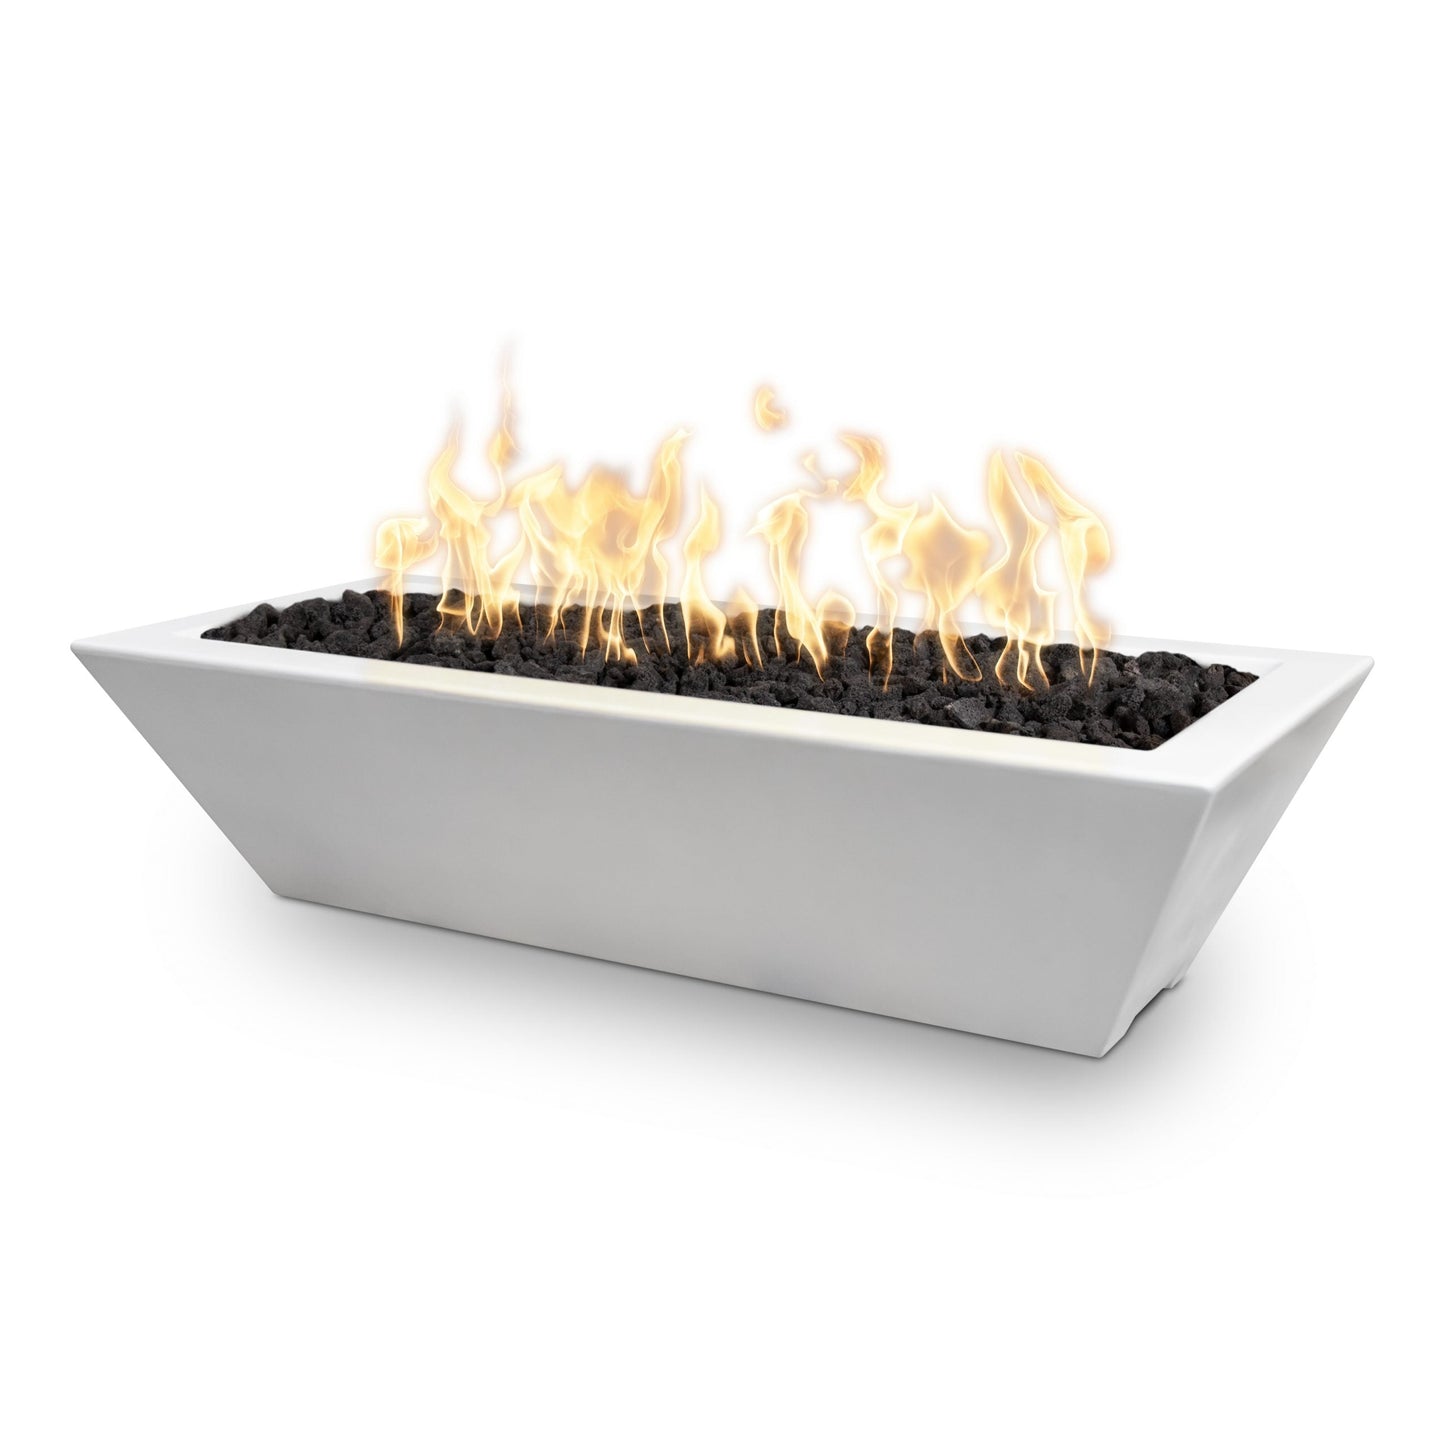 The Outdoor Plus Linear Maya 60" Black GFRC Concrete Liquid Propane Fire Bowl with 12V Electronic Ignition